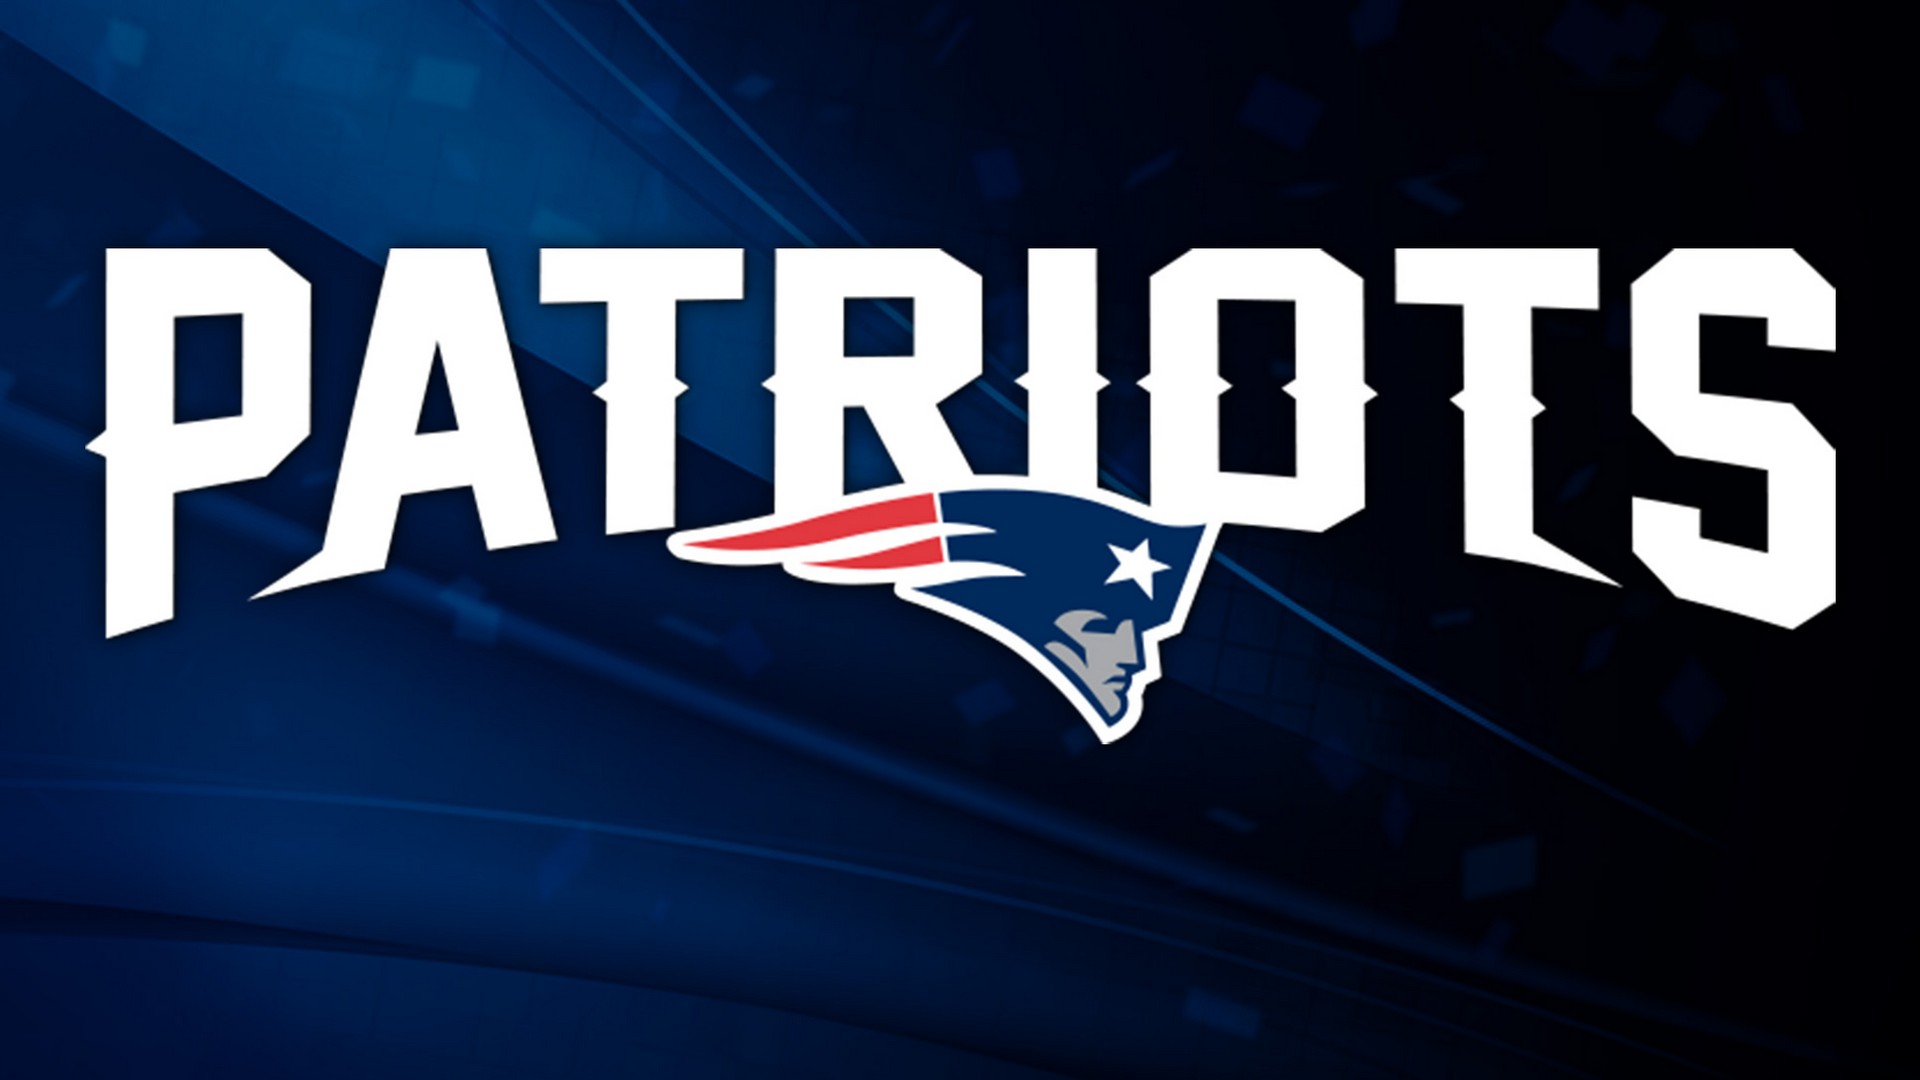 HD Desktop Wallpaper New England Patriots with resolution 1920x1080 pixel. You can make this wallpaper for your Mac or Windows Desktop Background, iPhone, Android or Tablet and another Smartphone device